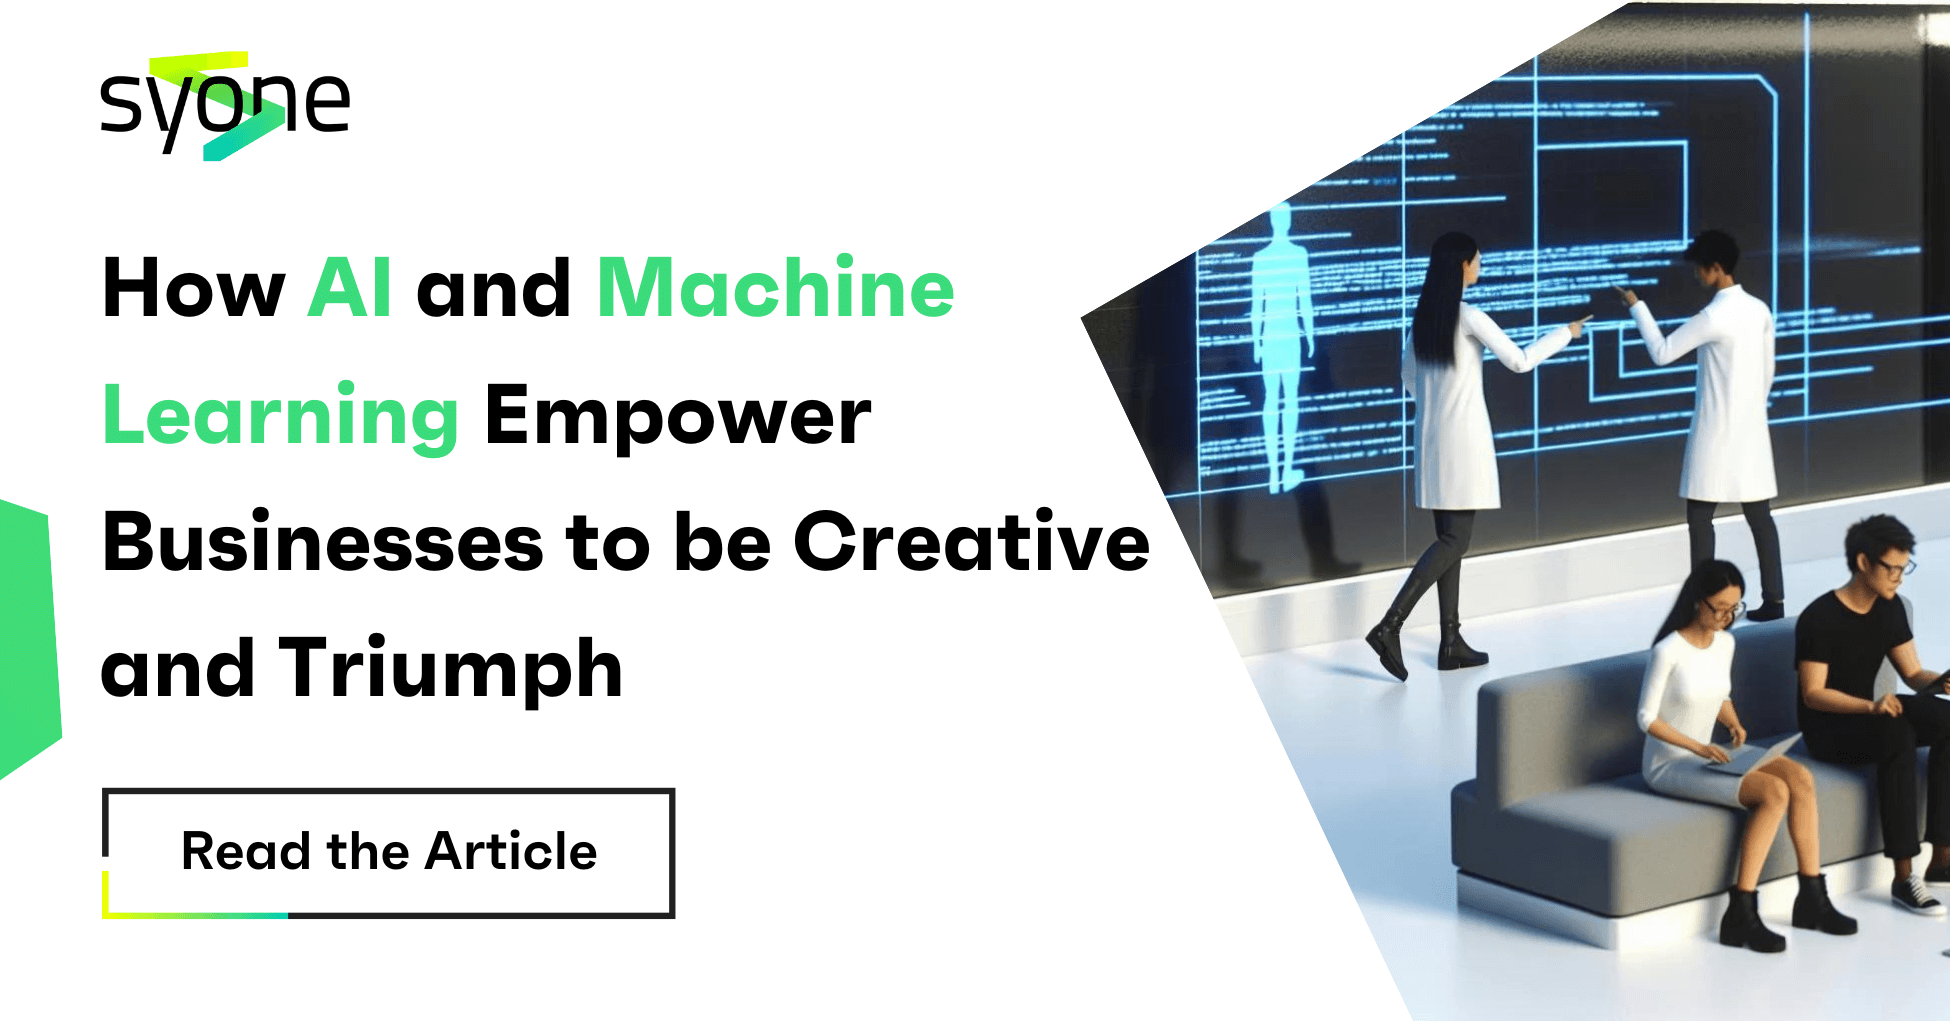 How AI and Machine Learning Empower Businesses to be Creative and Triumph